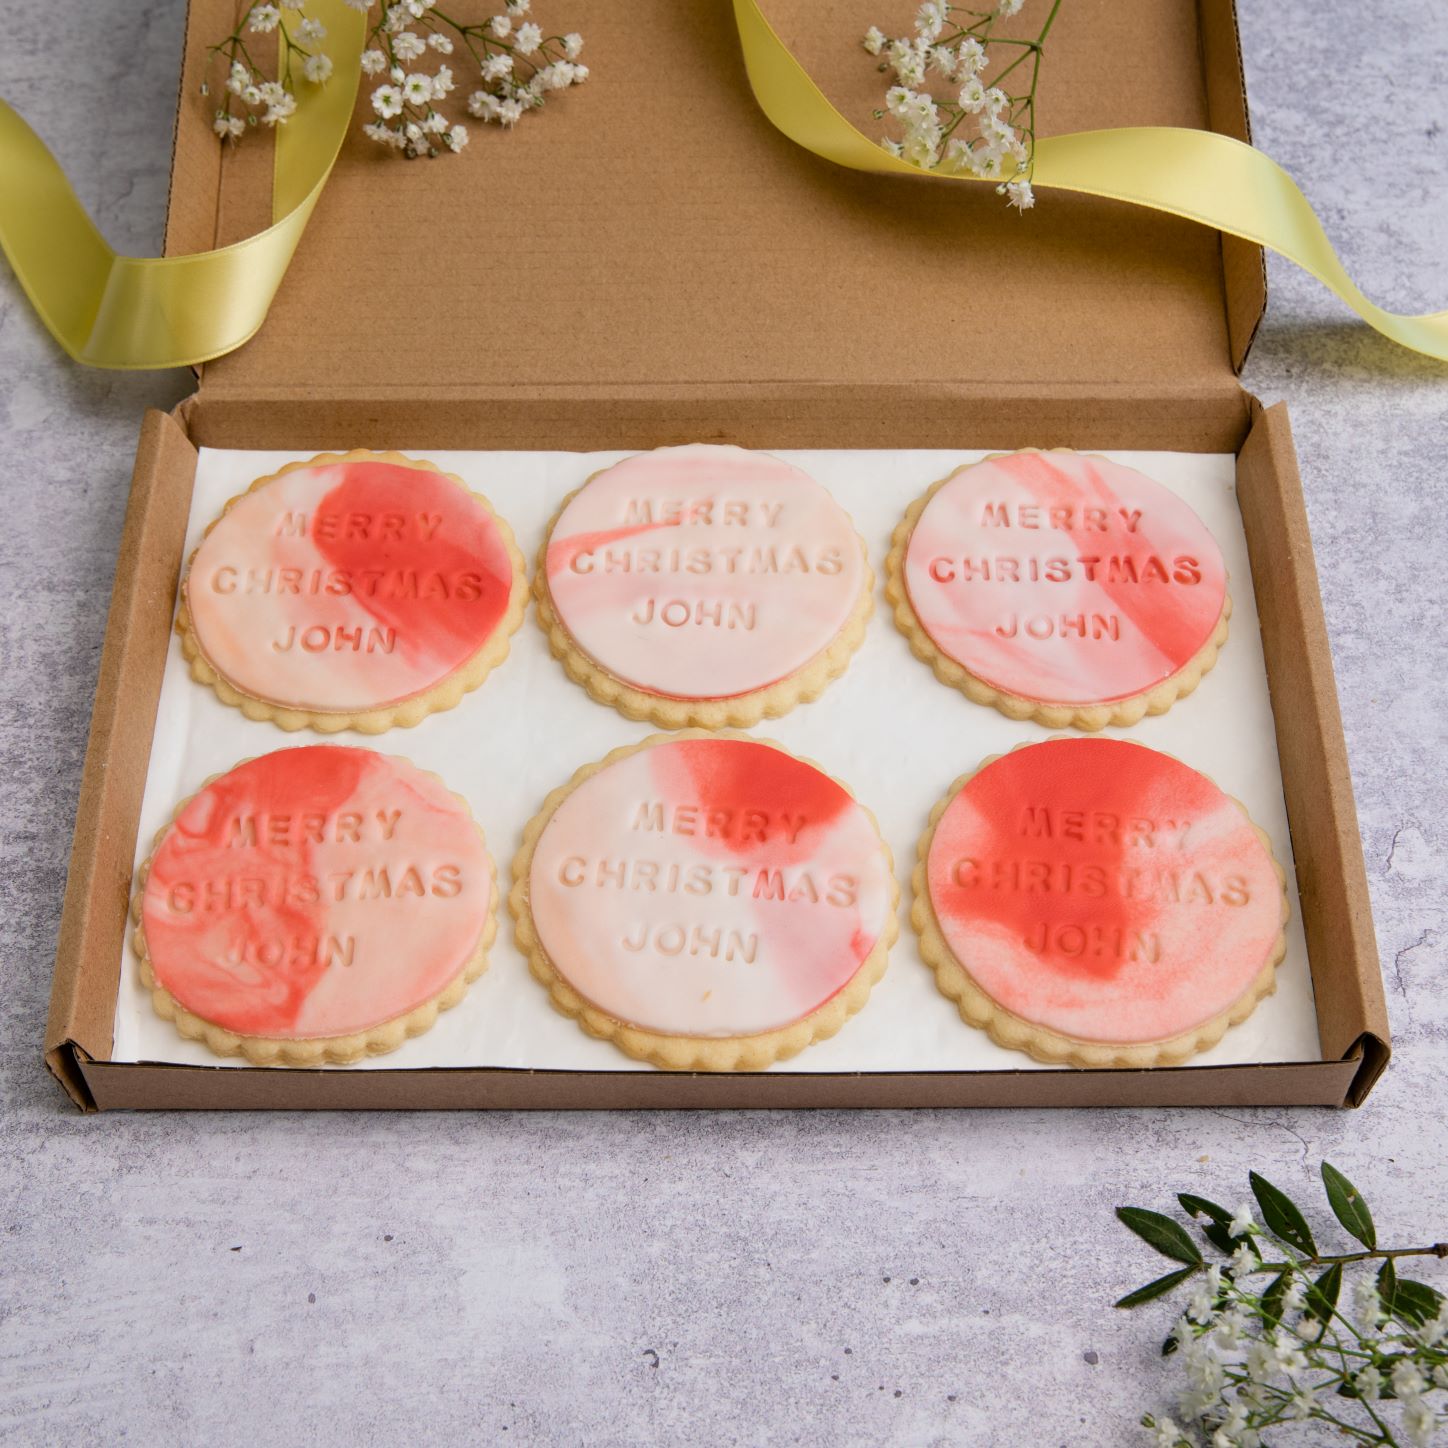 Letterbox friendly gift of 6 iced merry christmas biscuits